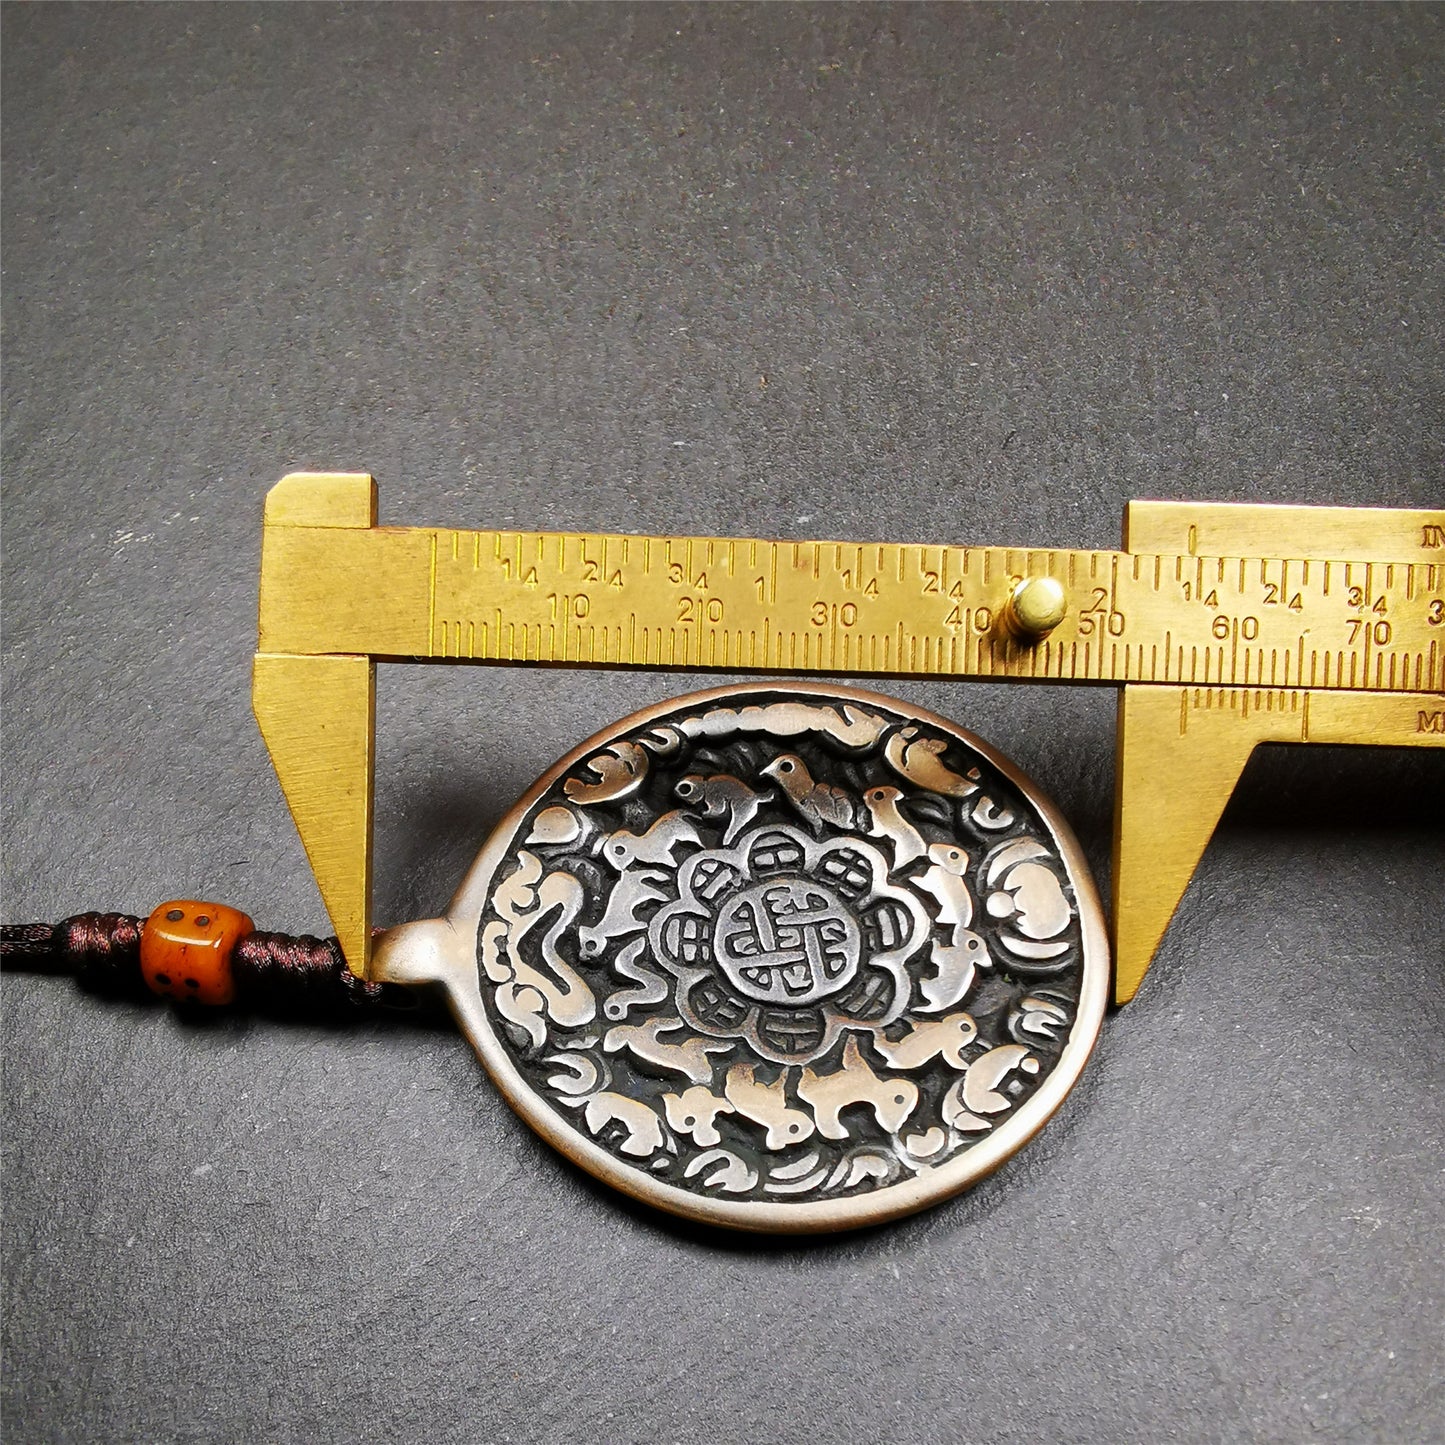 This unique tibetan melong badge was collected from Baiyu Monastery for 30 years. It's a Astrology Protective Amulet Pendant,made of cold iron. The pattern is Tibetan Budhist Protective Amulet Pendant - SIPAHO(srid pa ho).